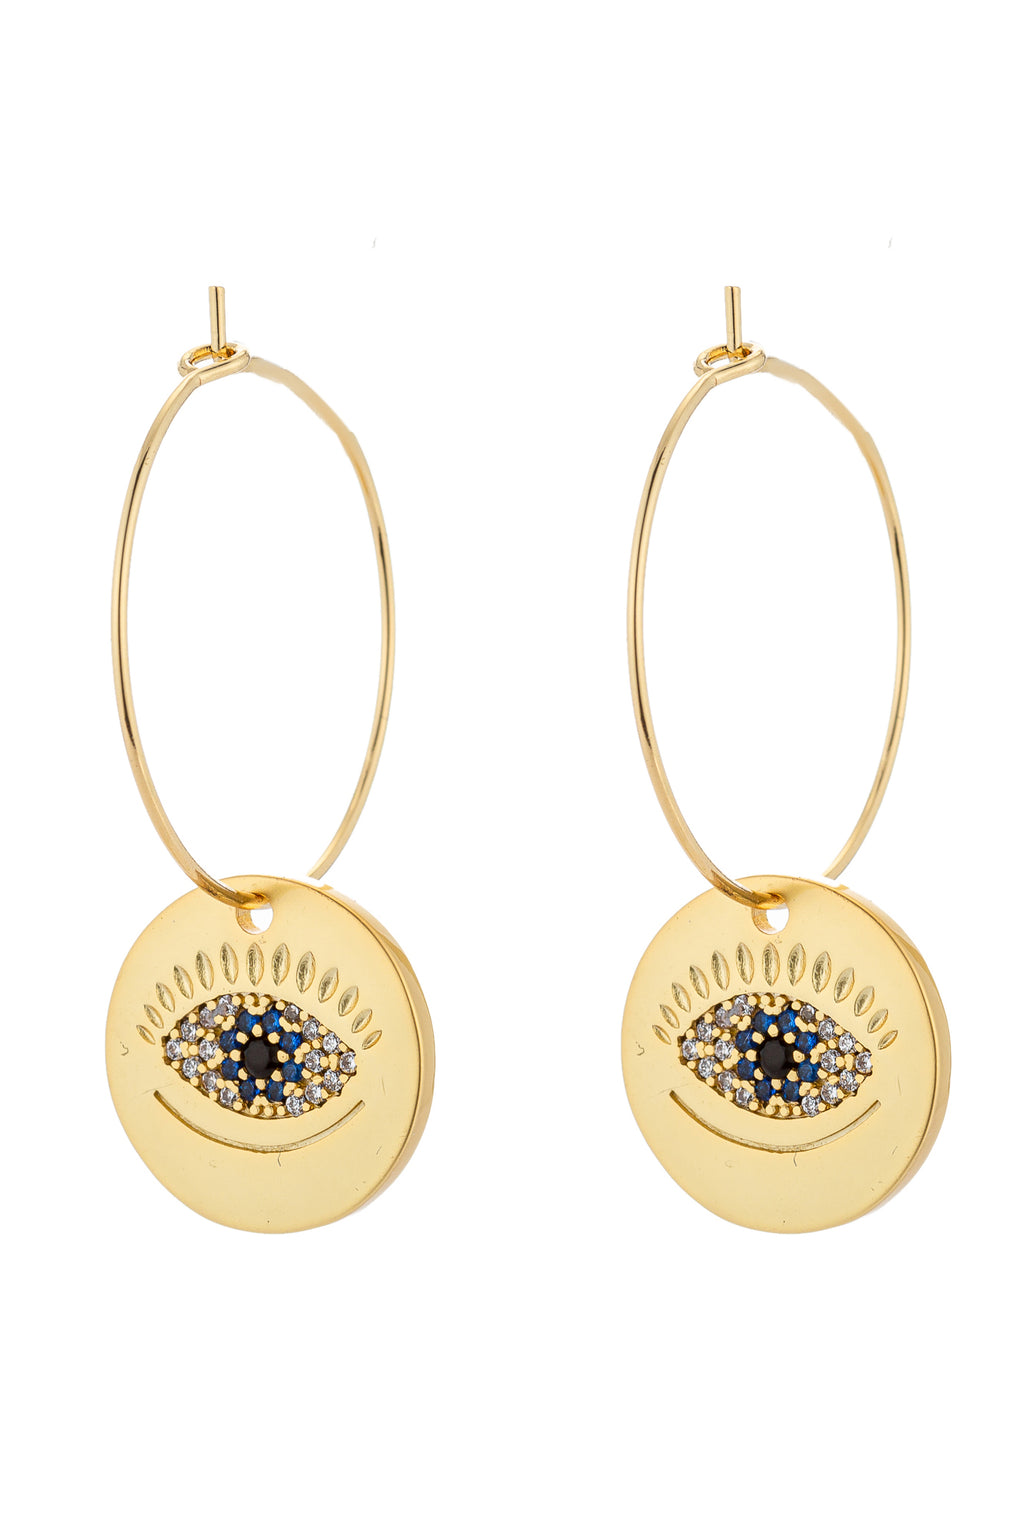 18k matte gold plated evil eye charm earrings studded with CZ crystals.